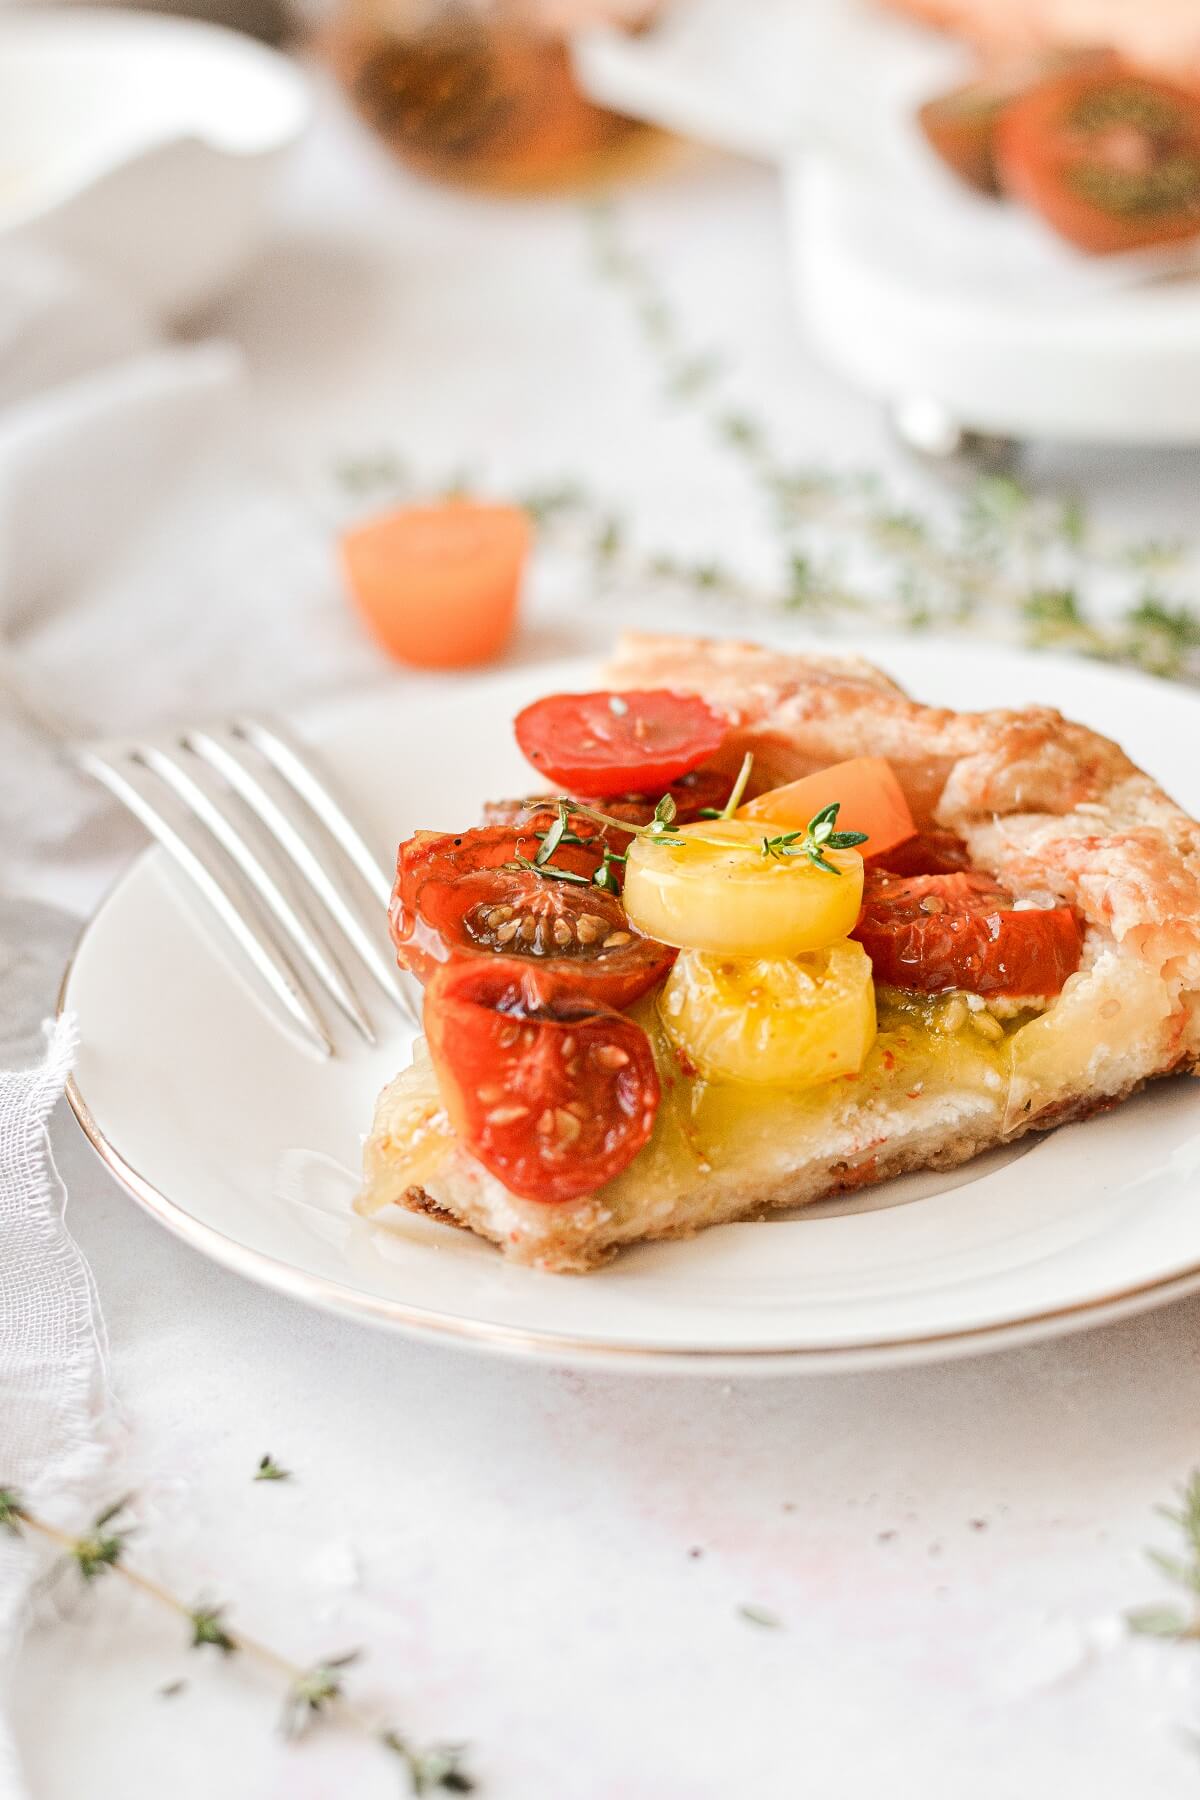 A slice of tomato galette on a white plate.